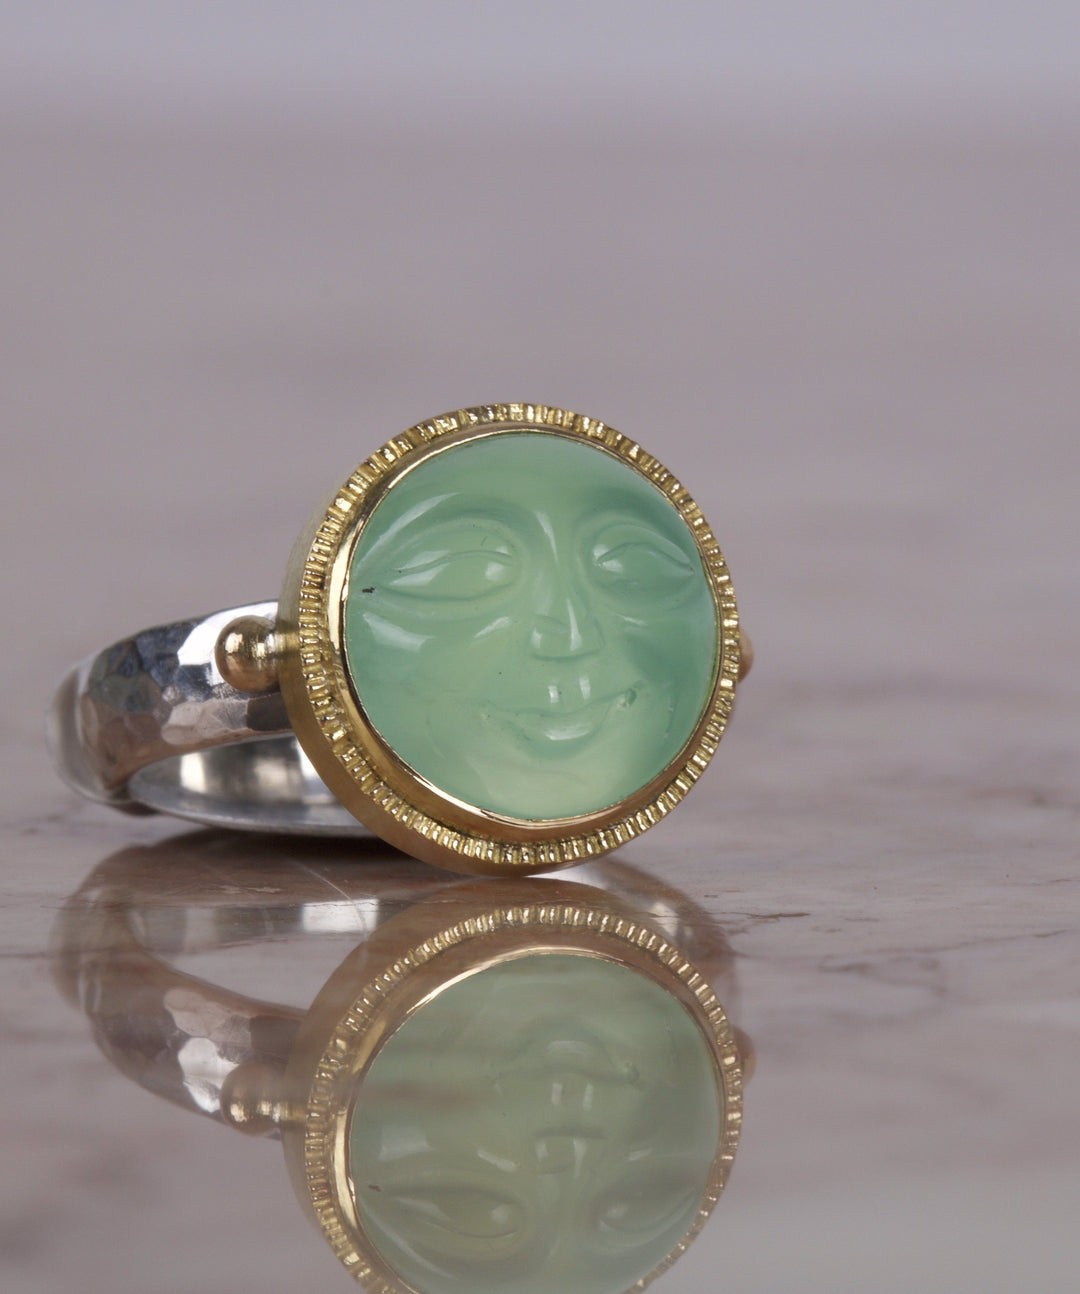 Chrysoprase Moon Face Ring 05688 - Ormachea Jewelry